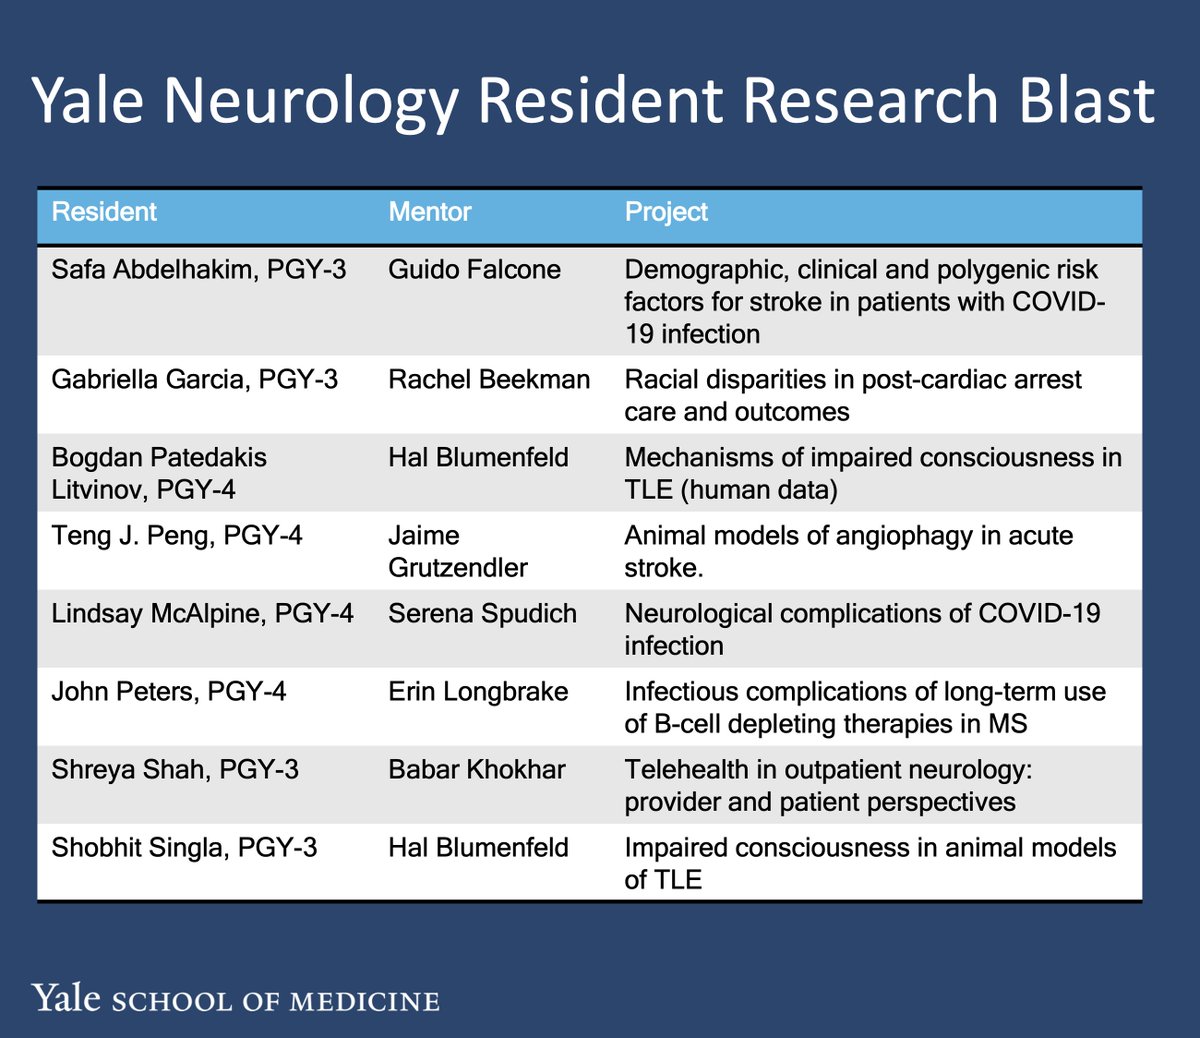 We had an excellent @YaleNeurons Resident Research Blast yesterday: a rapid-fire overview of work in progress and exciting ideas for the future. Amazing to see the depth and breadth of projects mentored by @NeurologyYale faculty! @GuidoFalconeMD @SpudichSerena